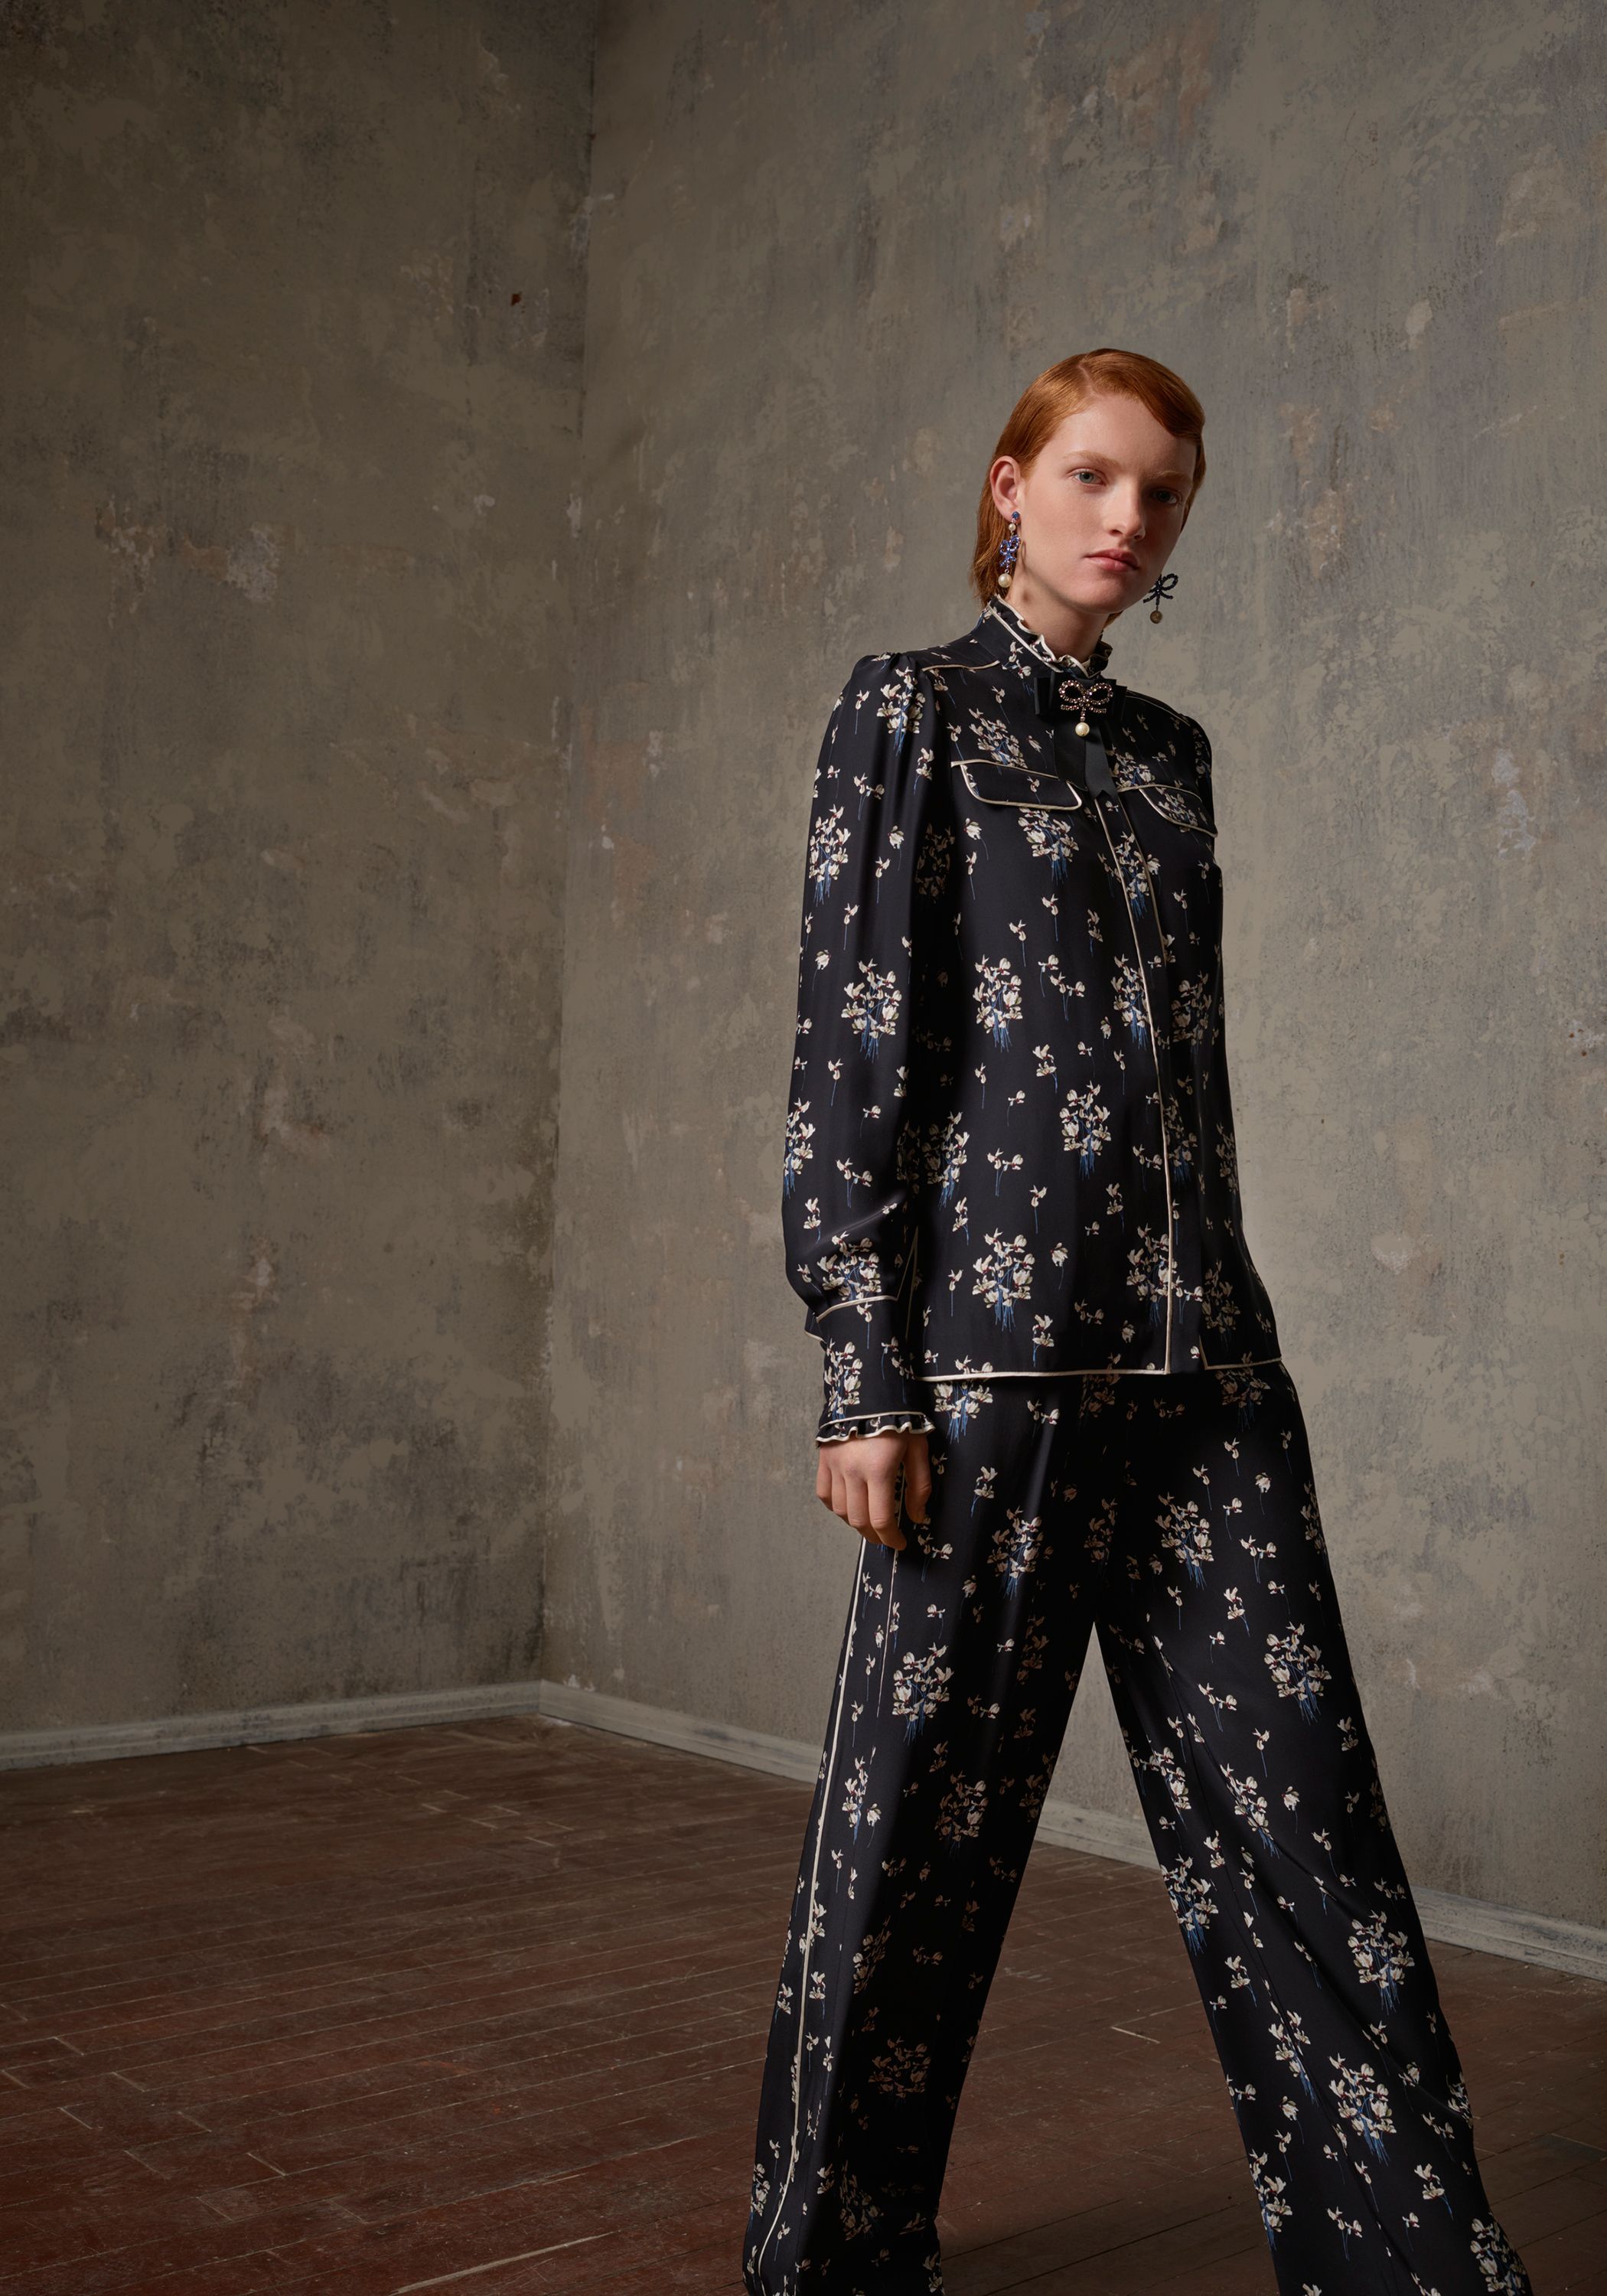 Erdem for H&M: See the full collection